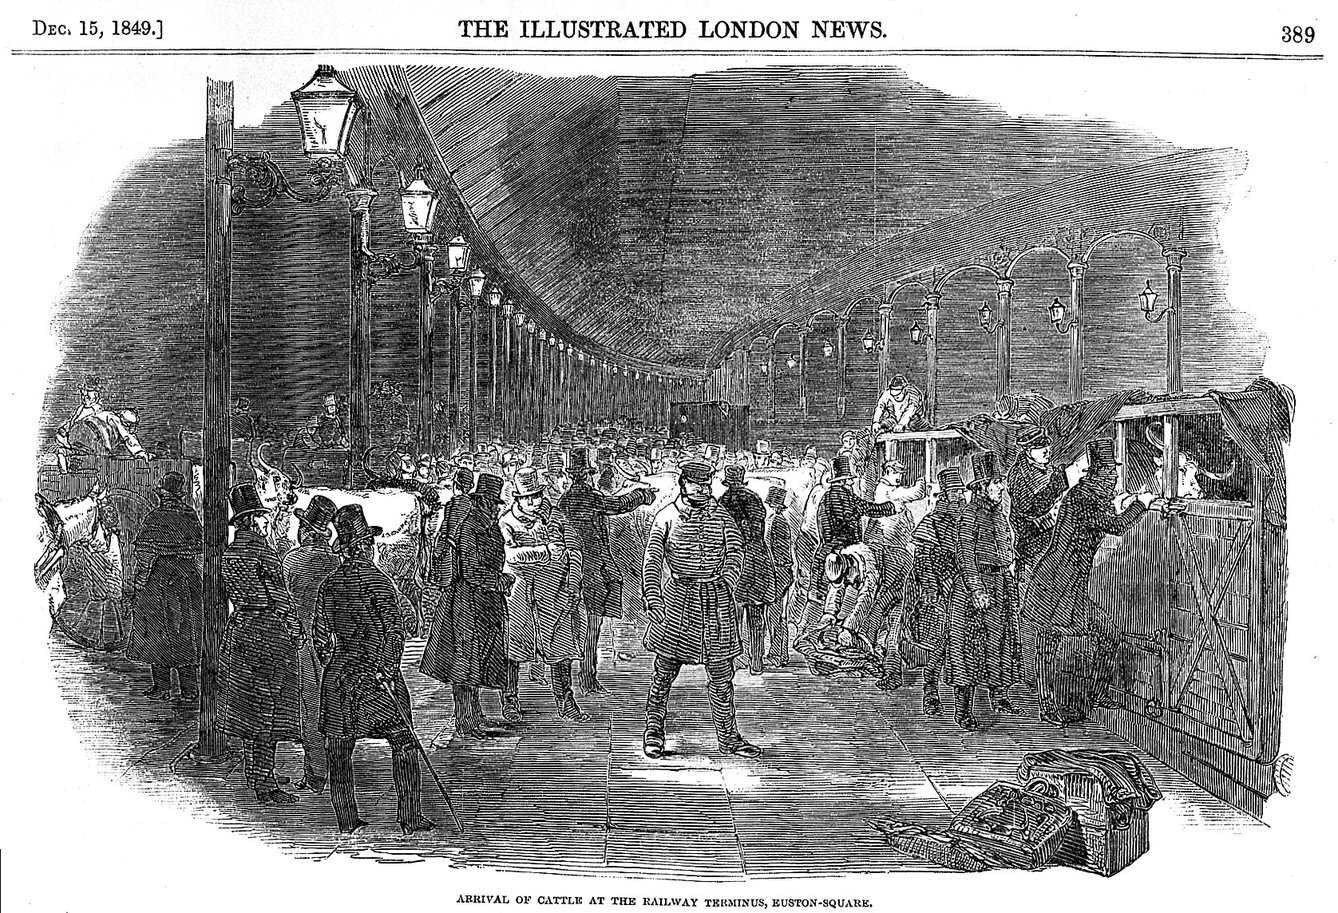 Illustration from the Illustrated London News showing a crowded train platform at Euston Square station.  Cattle are being unloaded from crates and led through the crowd.  Text reads 'Arrival of cattle at the railway terminus, Euston Square.'